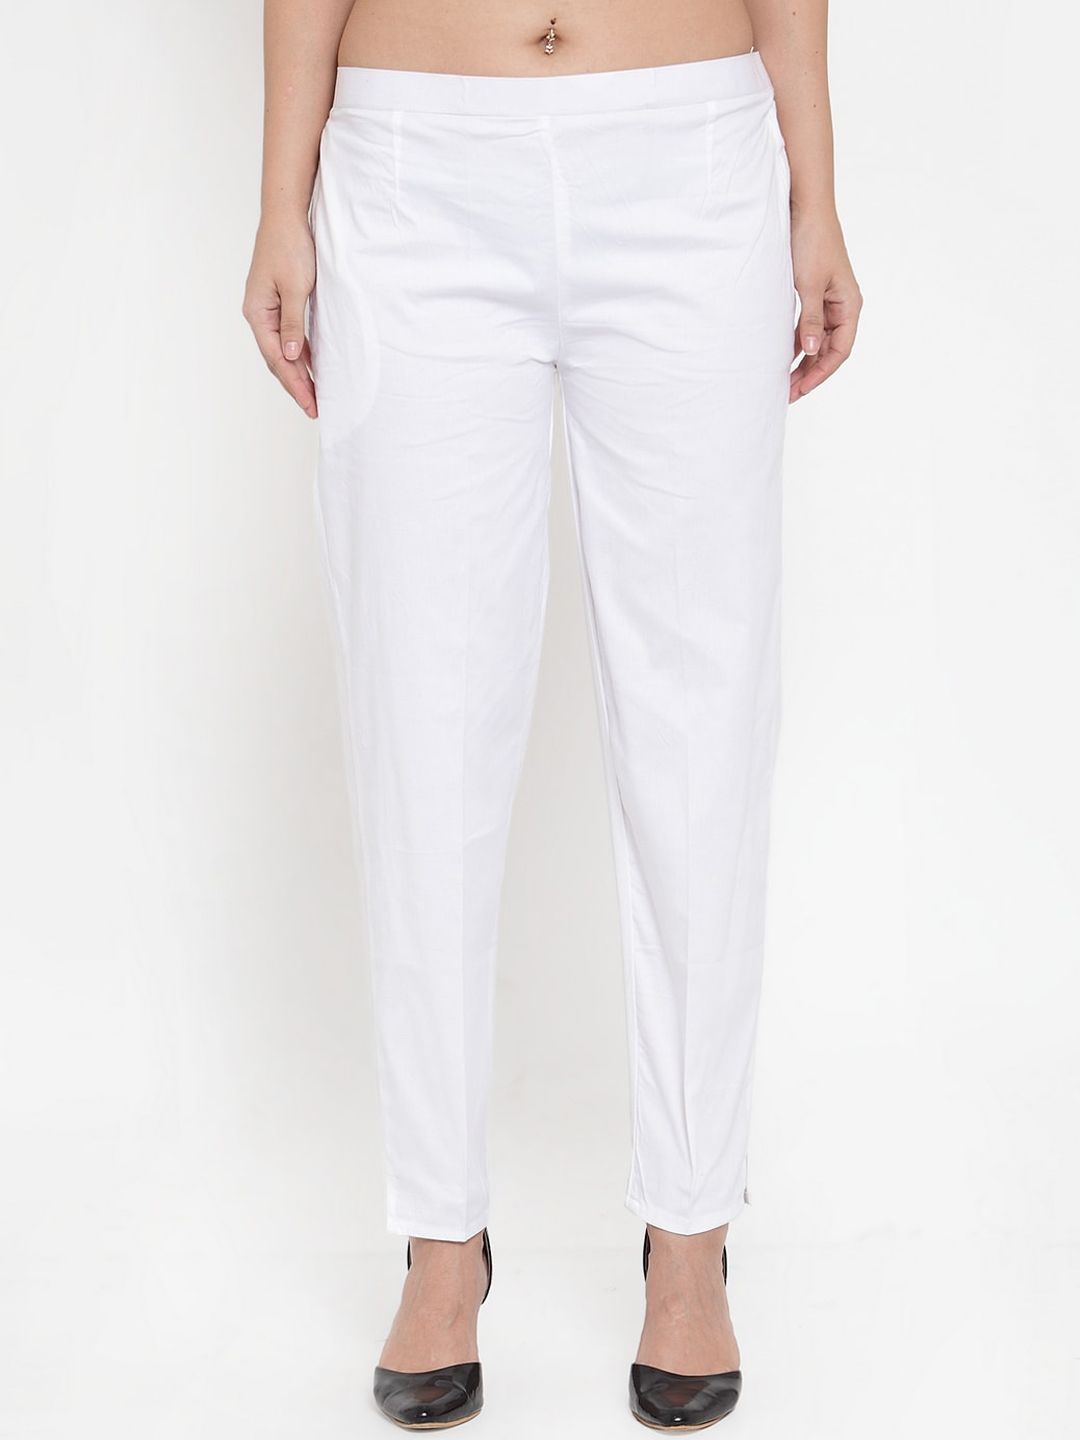 Clora Creation Women White Trousers Price in India